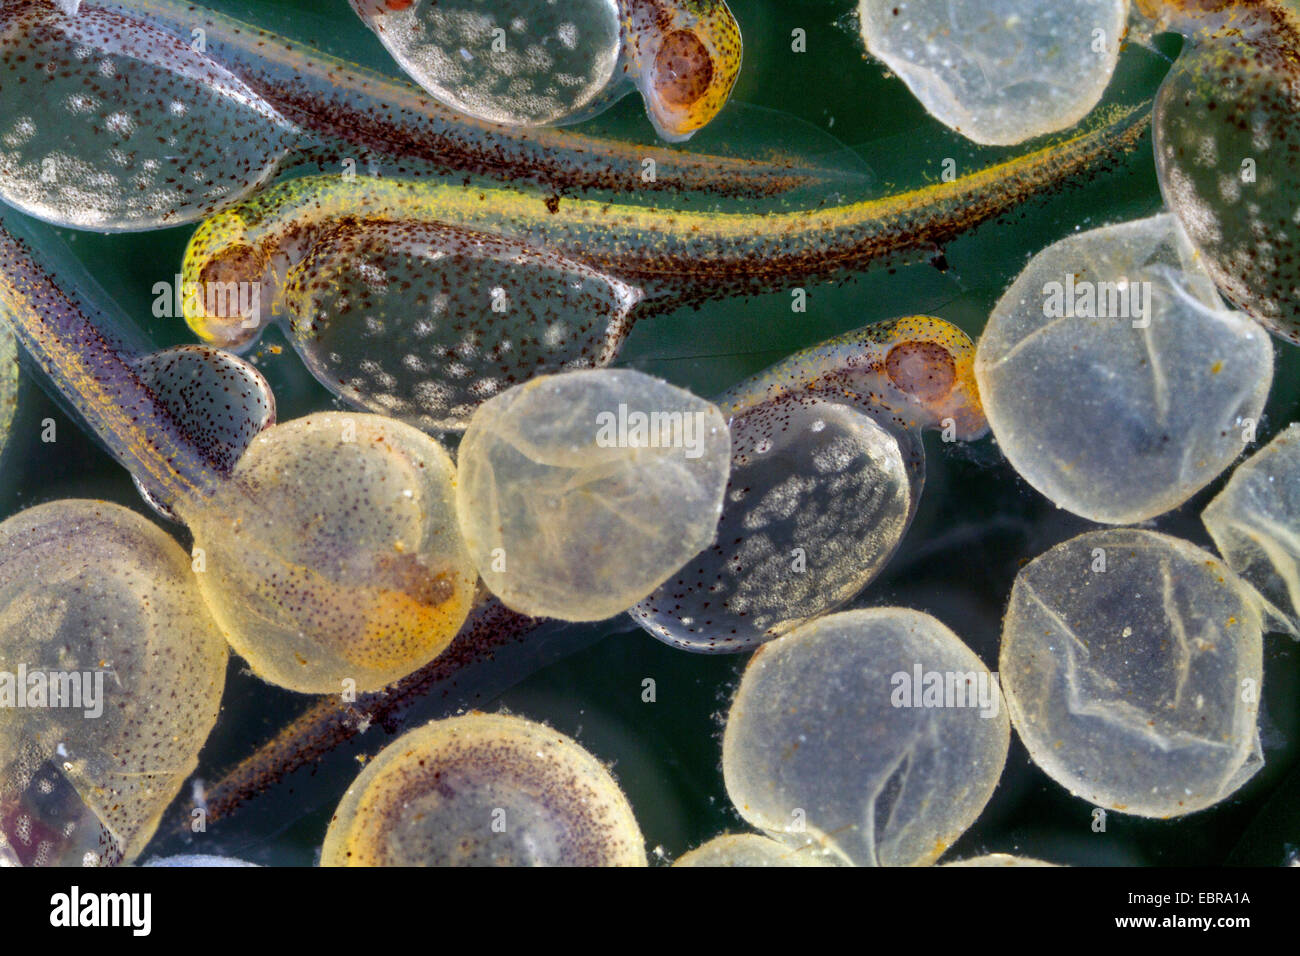 pike, northern pike (Esox lucius), hatched larvae and eggshells, Germany Stock Photo